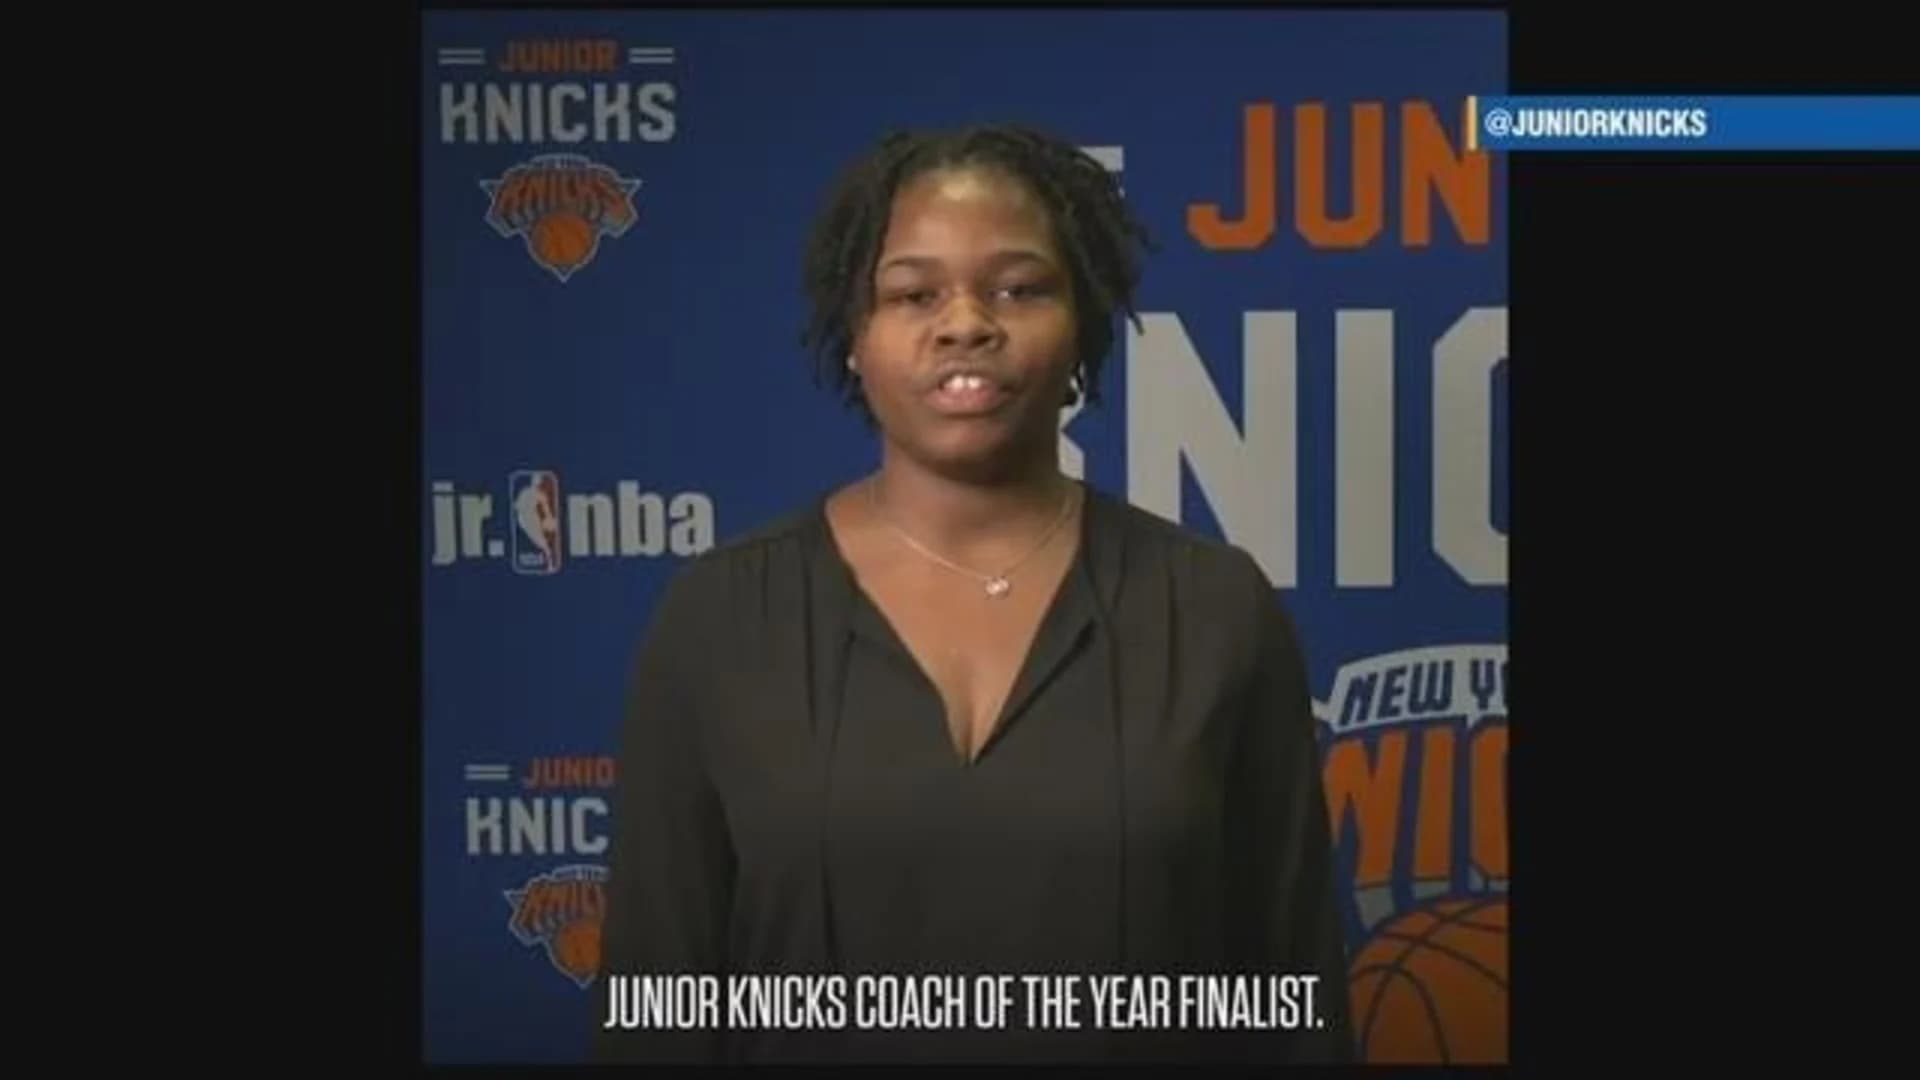 Baychester Middle School coach nominated for Jr. Knicks’ Coach of the Year Award